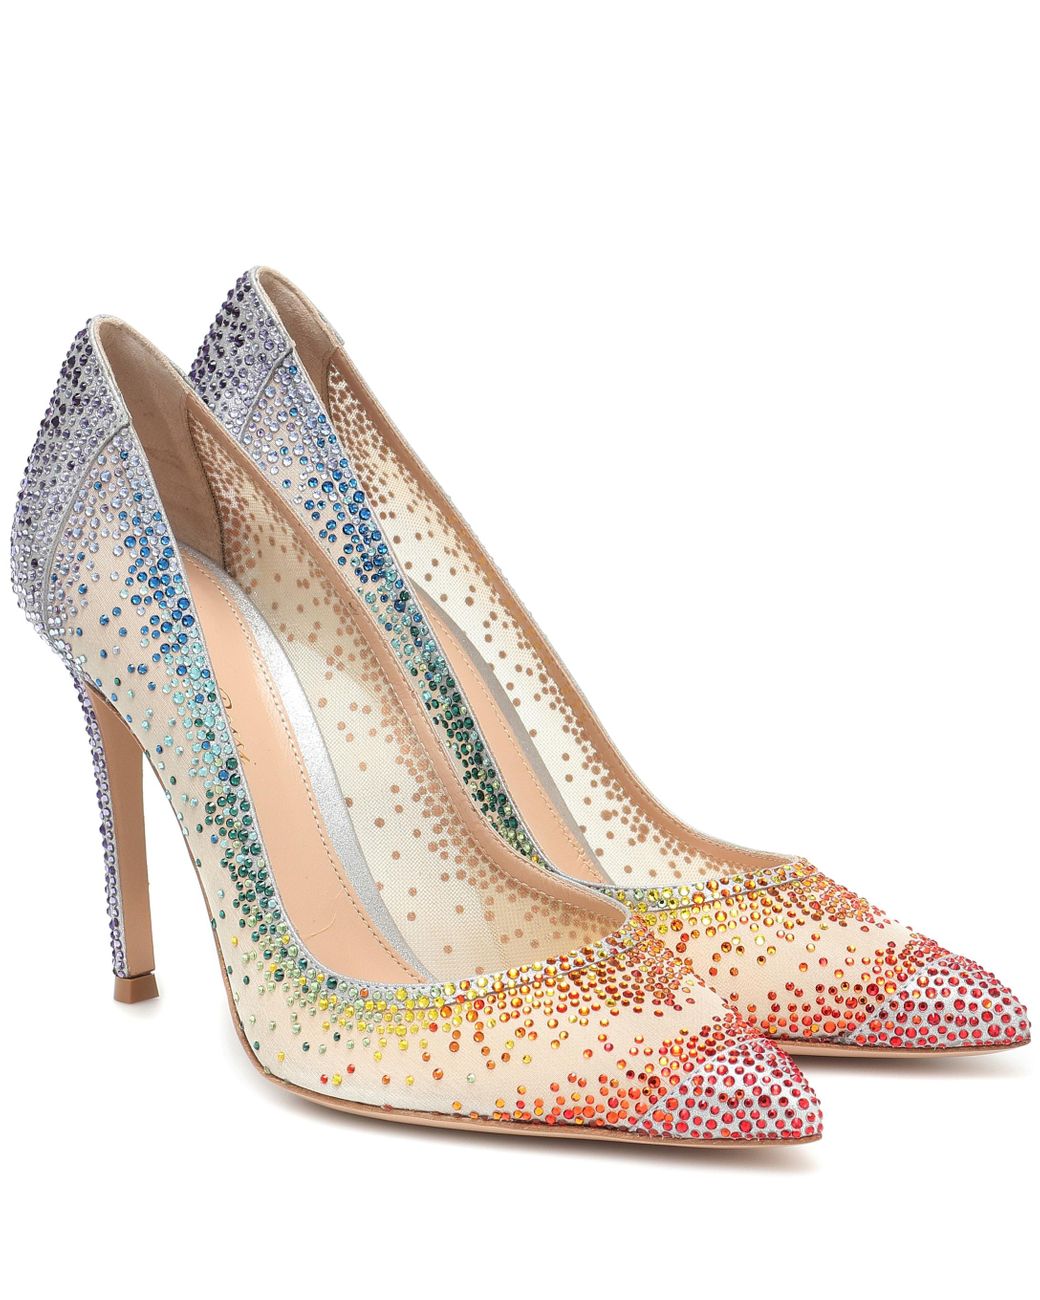 Gianvito Rossi Rania 105 Crystal-embellished Pumps - Lyst